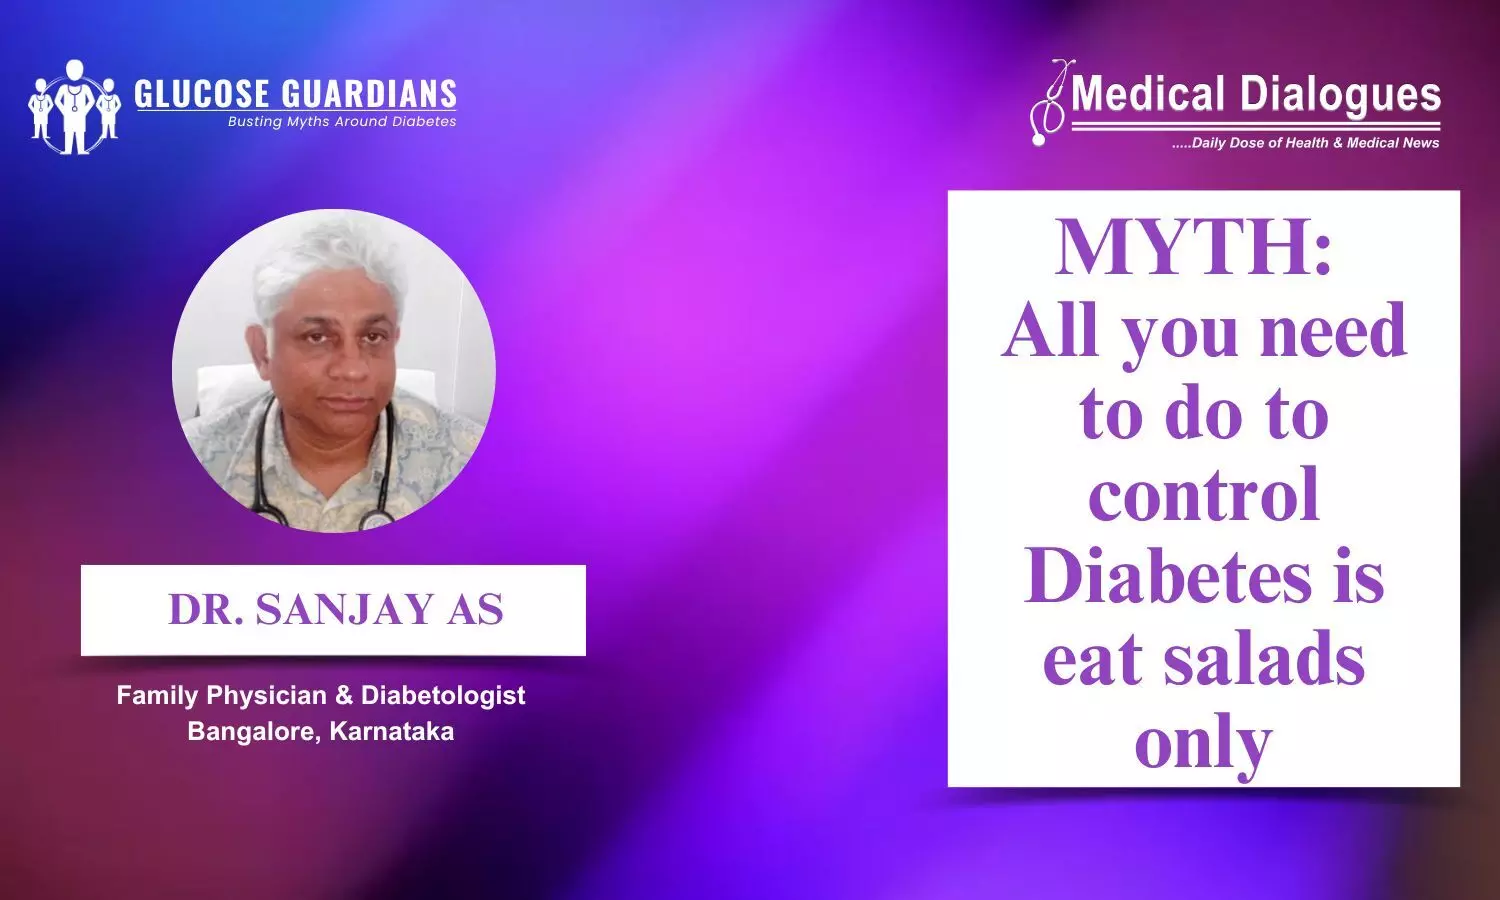 Can diabetes be effectively controlled by consuming only salads? - Dr Sanjay AS